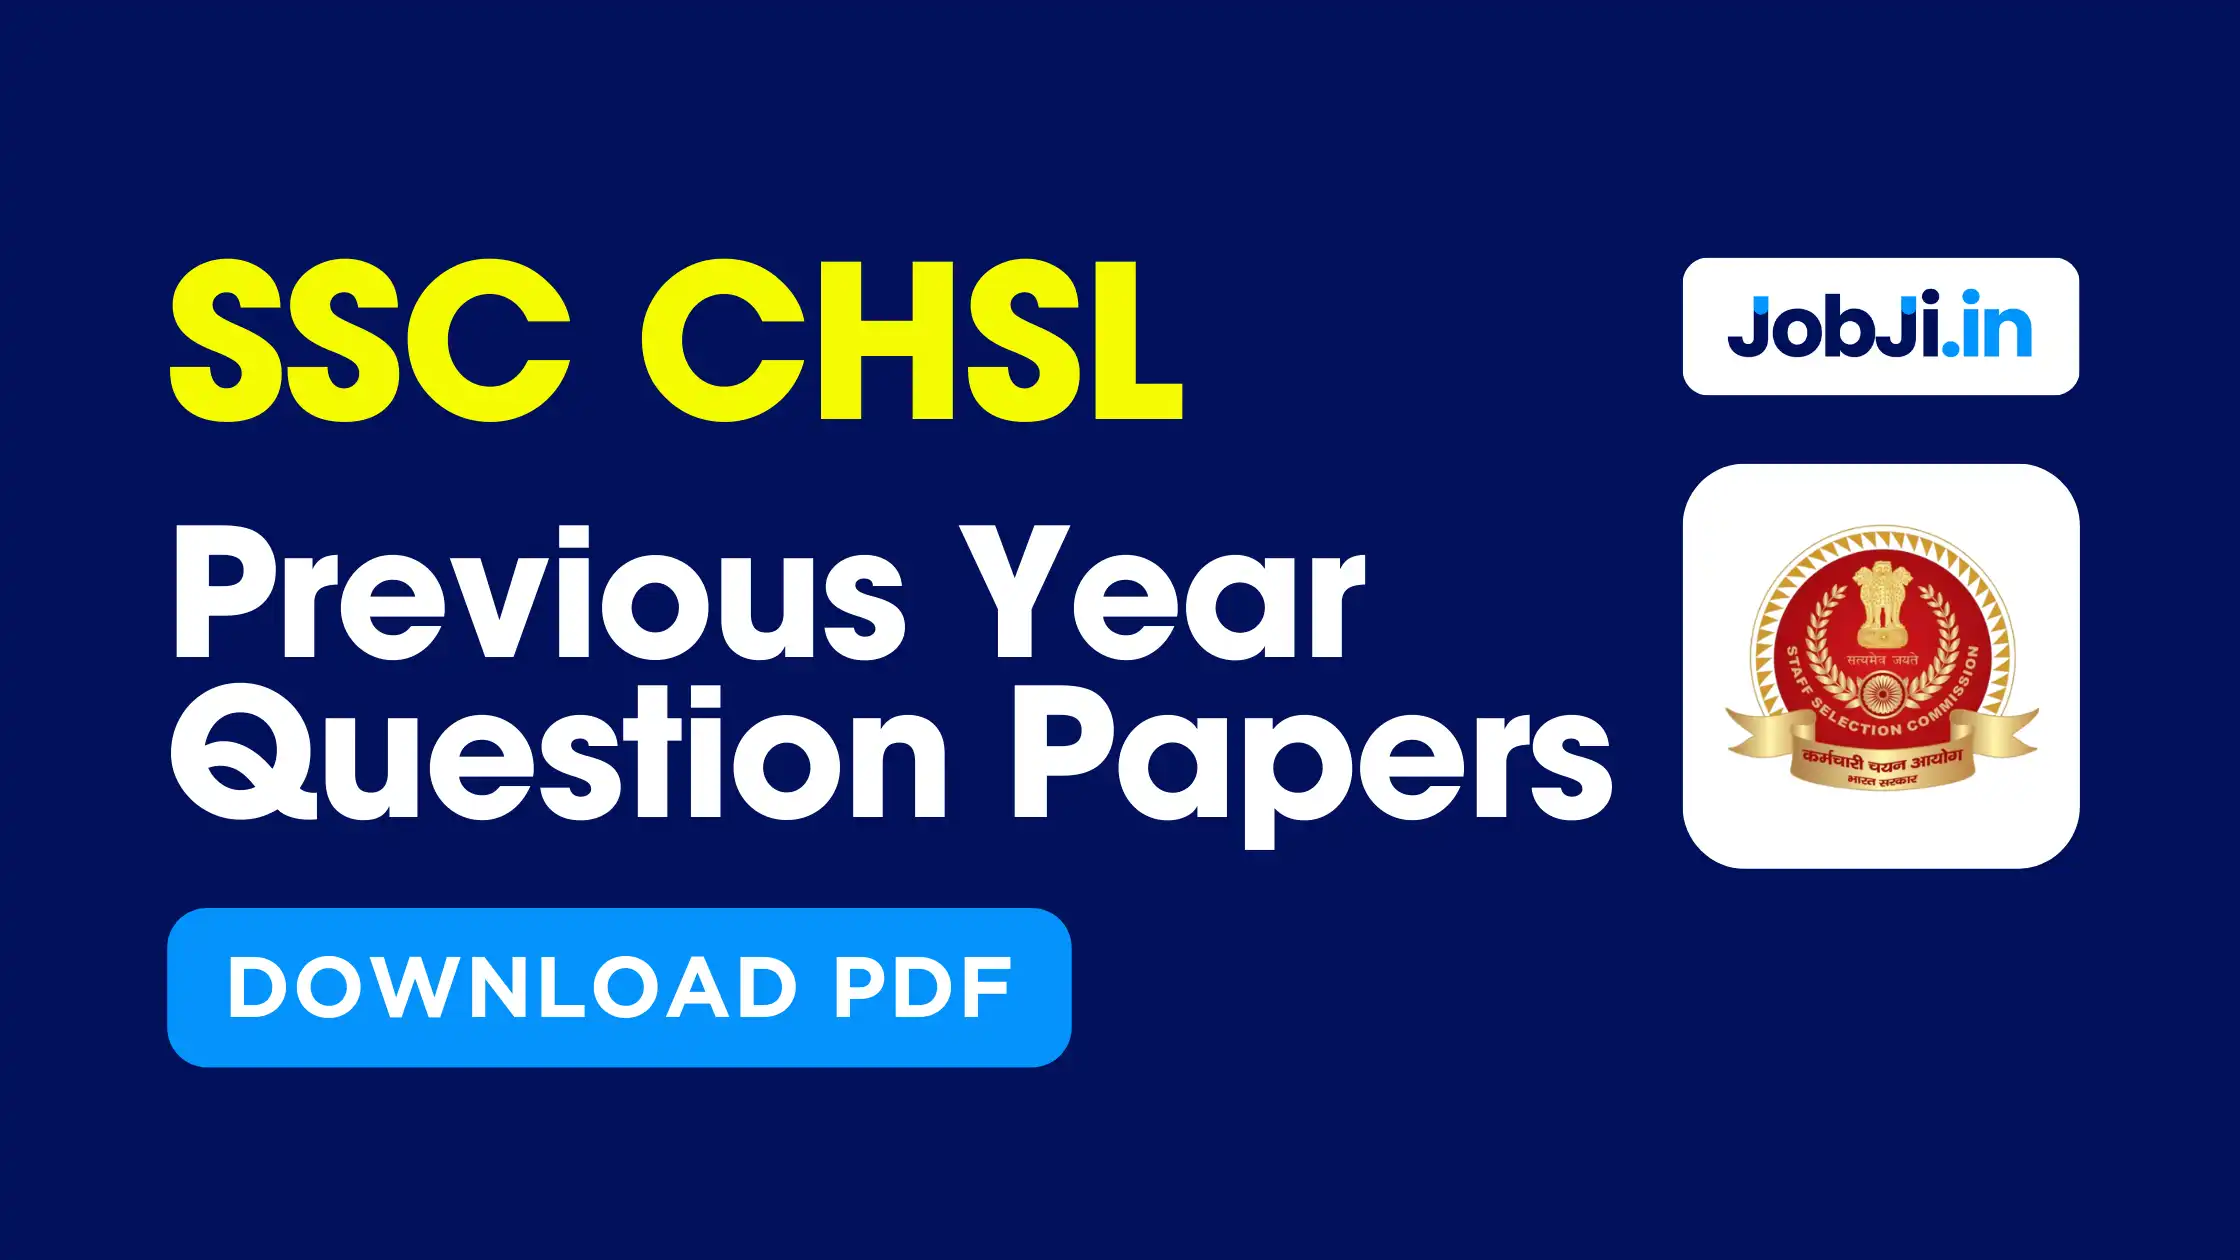 SSC CHSL previous year question papers